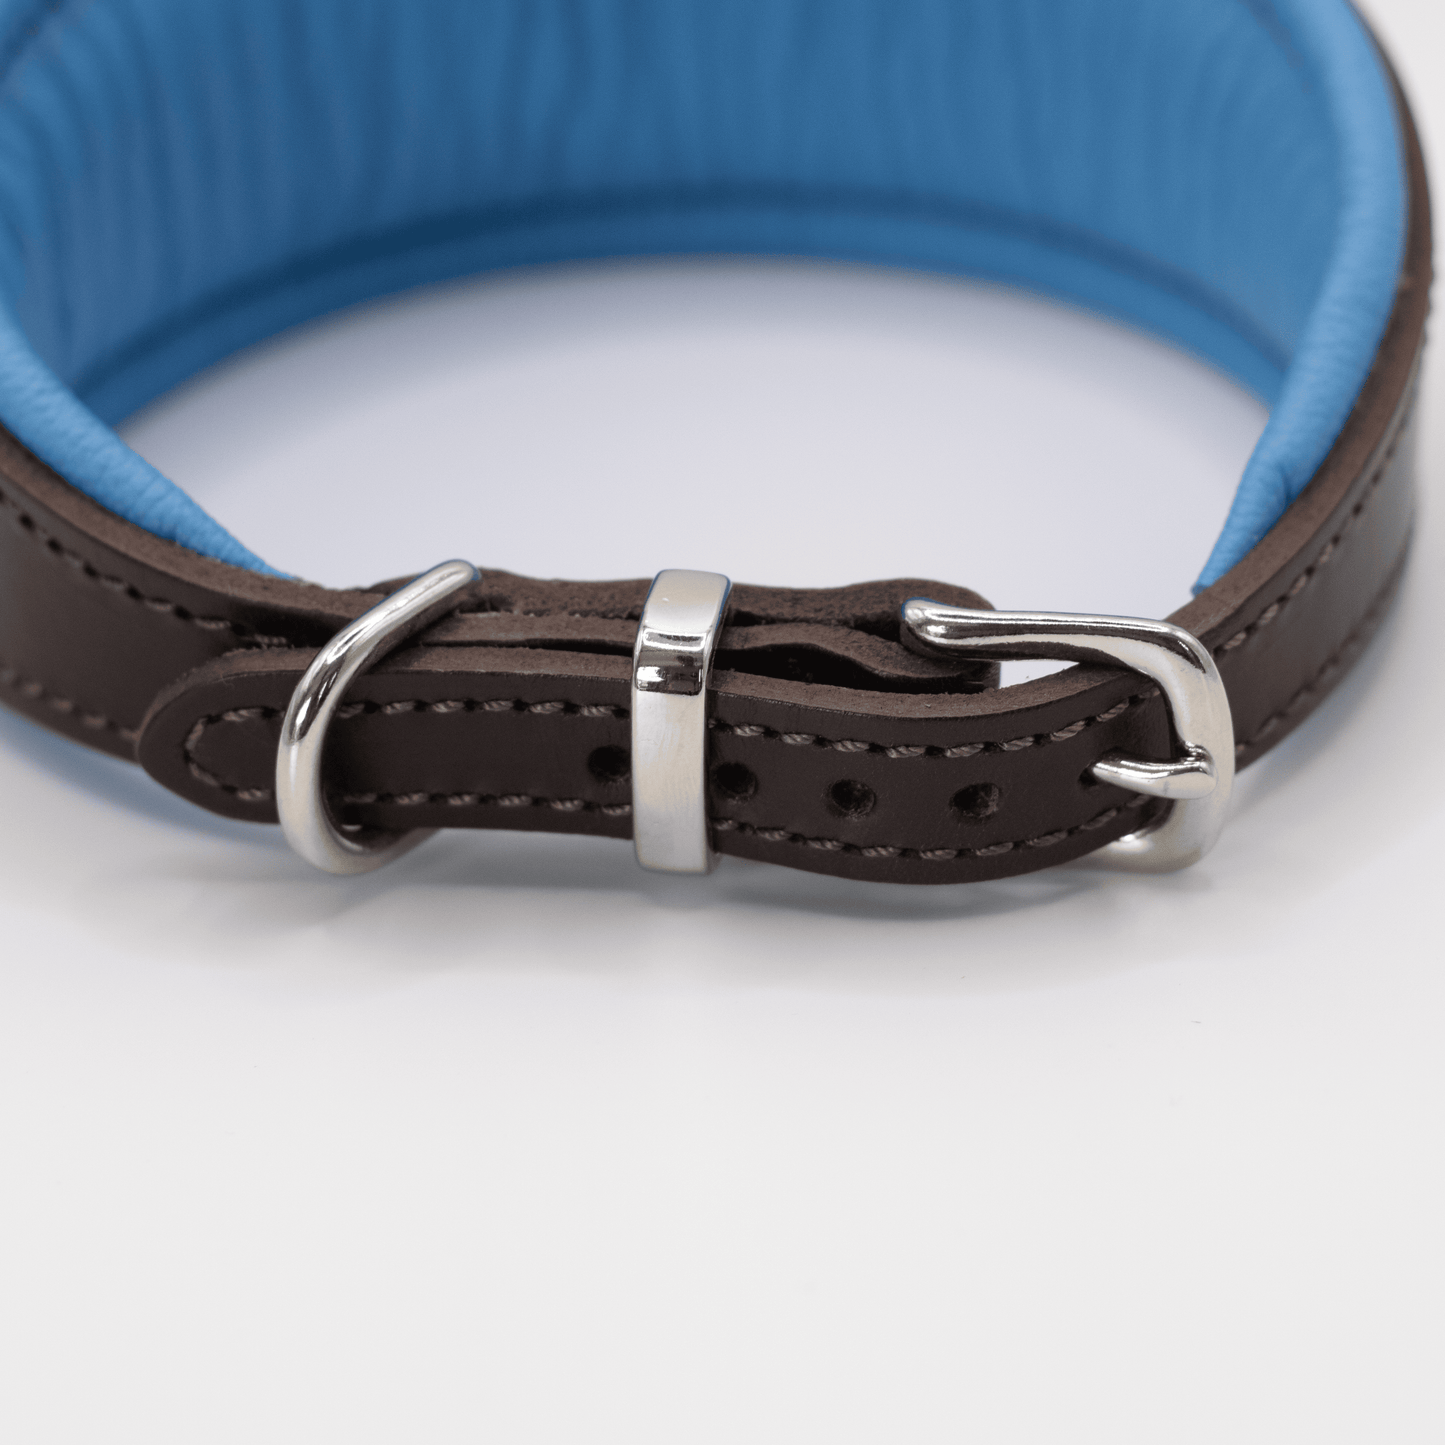 D&H Padded Leather Hound Collar Brown and Blue